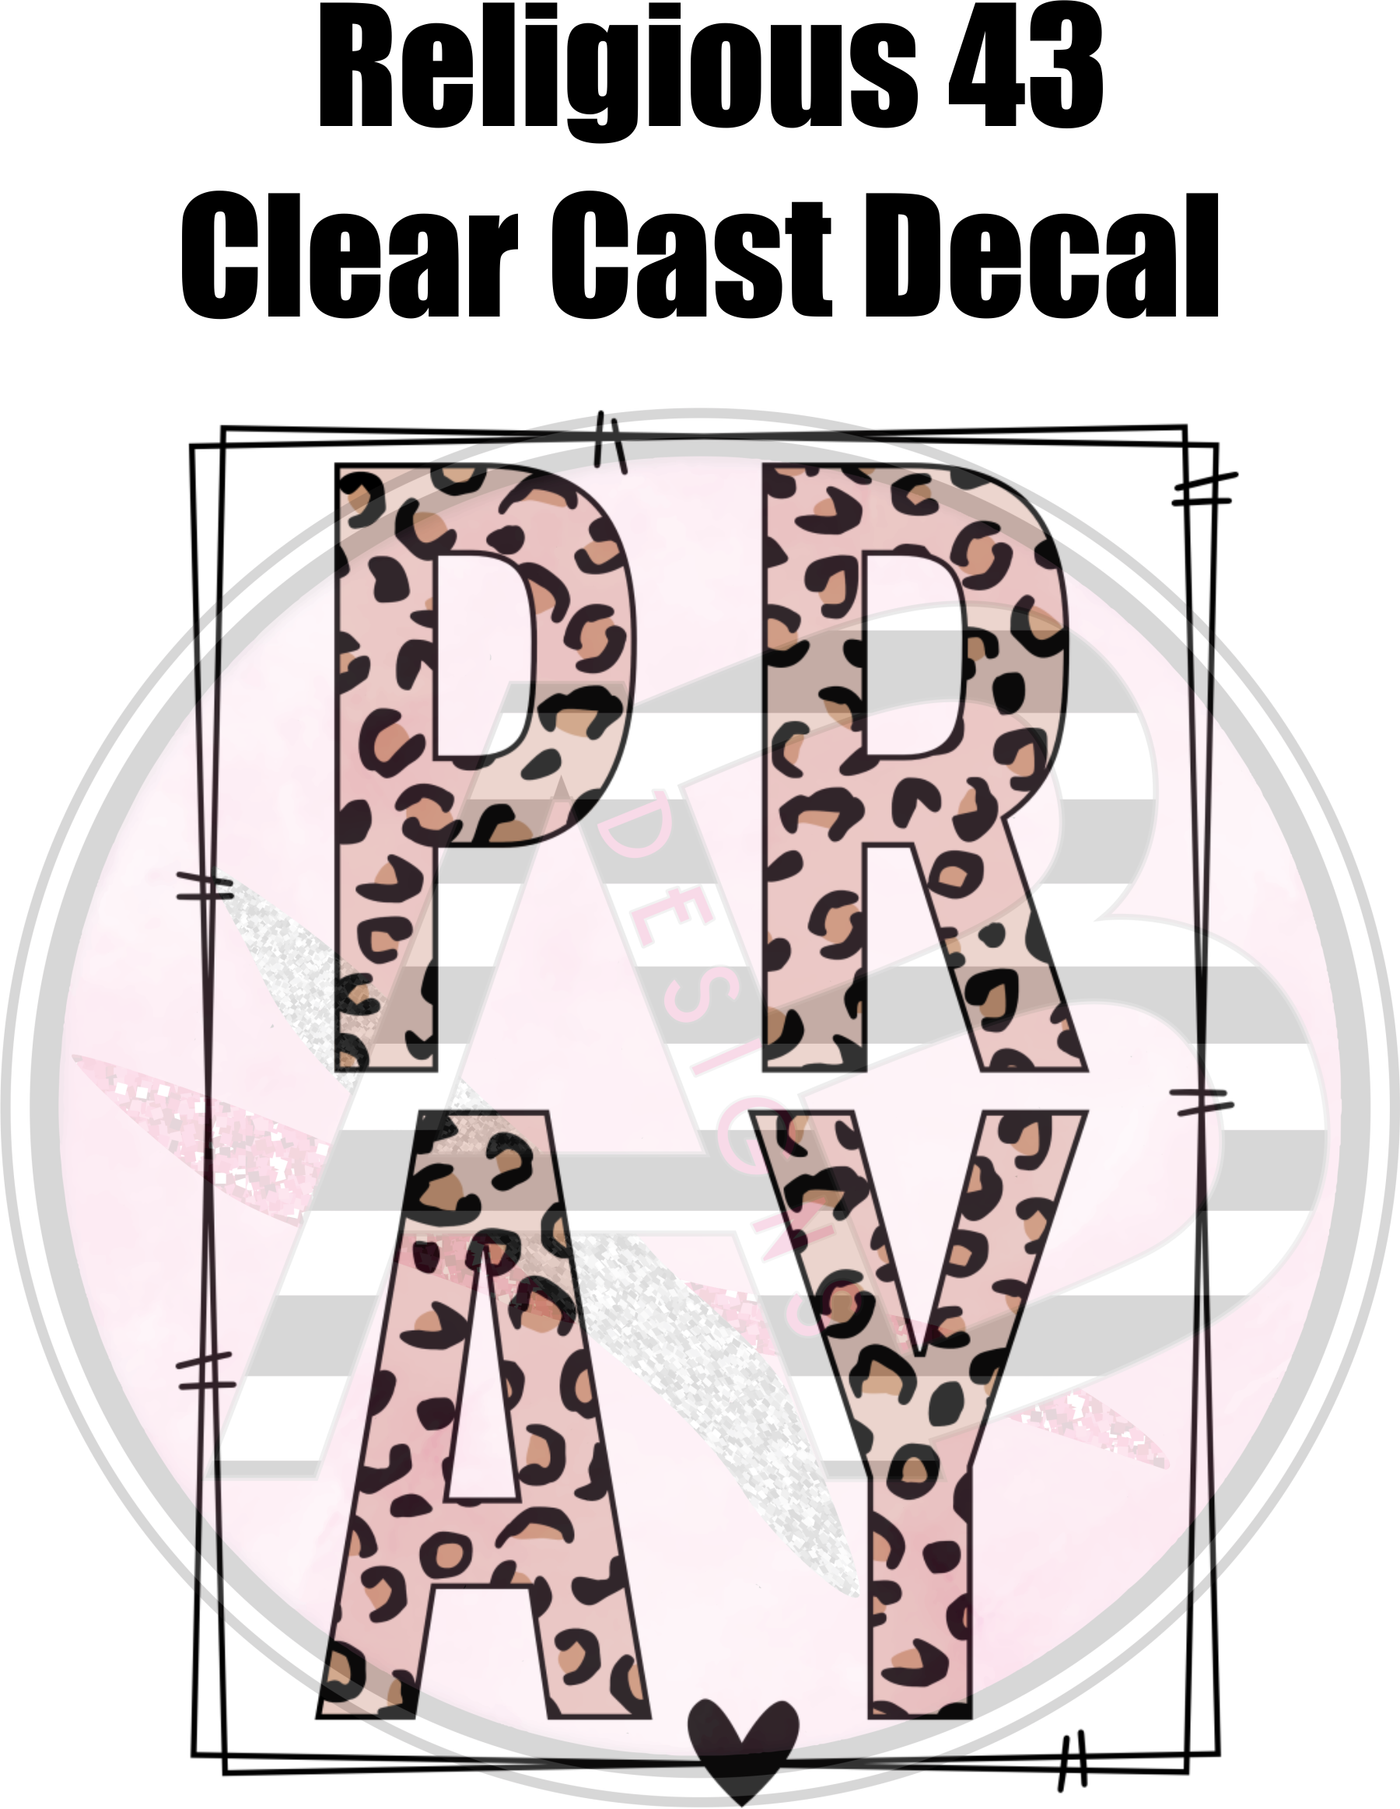 Religious 43 - Clear Cast Decal